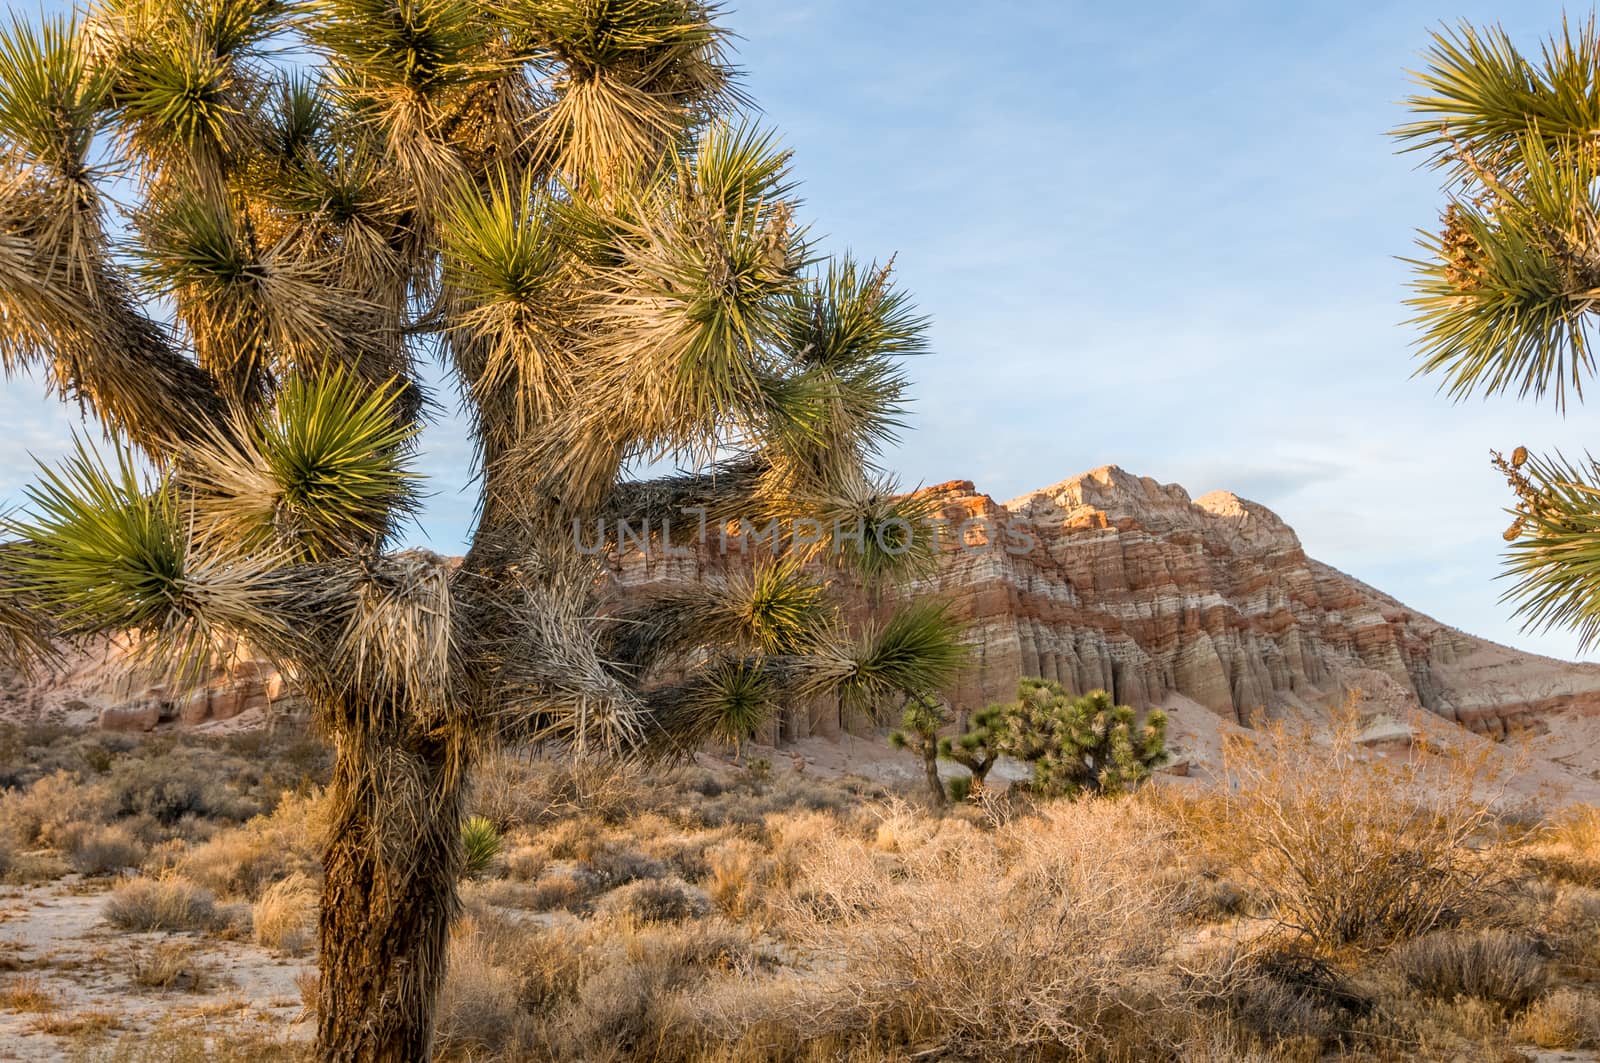 Red Cliffs Natural Preserve (Red Rock Canyon, CA) featuring joshua trees (Yucca brevifolia) by Njean